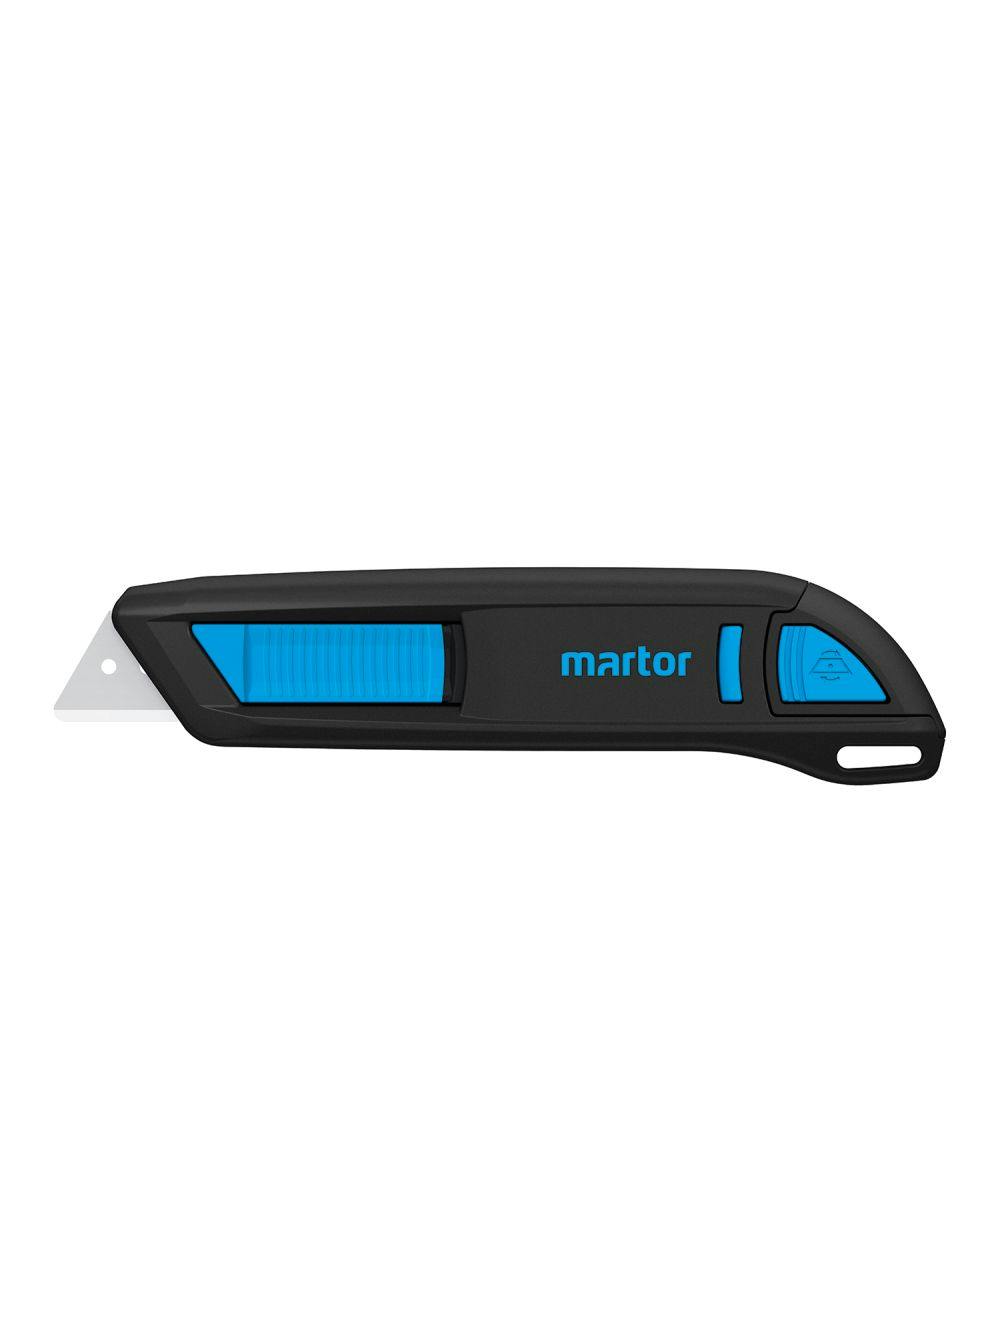 Martor Secunorm 300 With Blade No. 65232, Rounded Blade Tips (Single Unit)